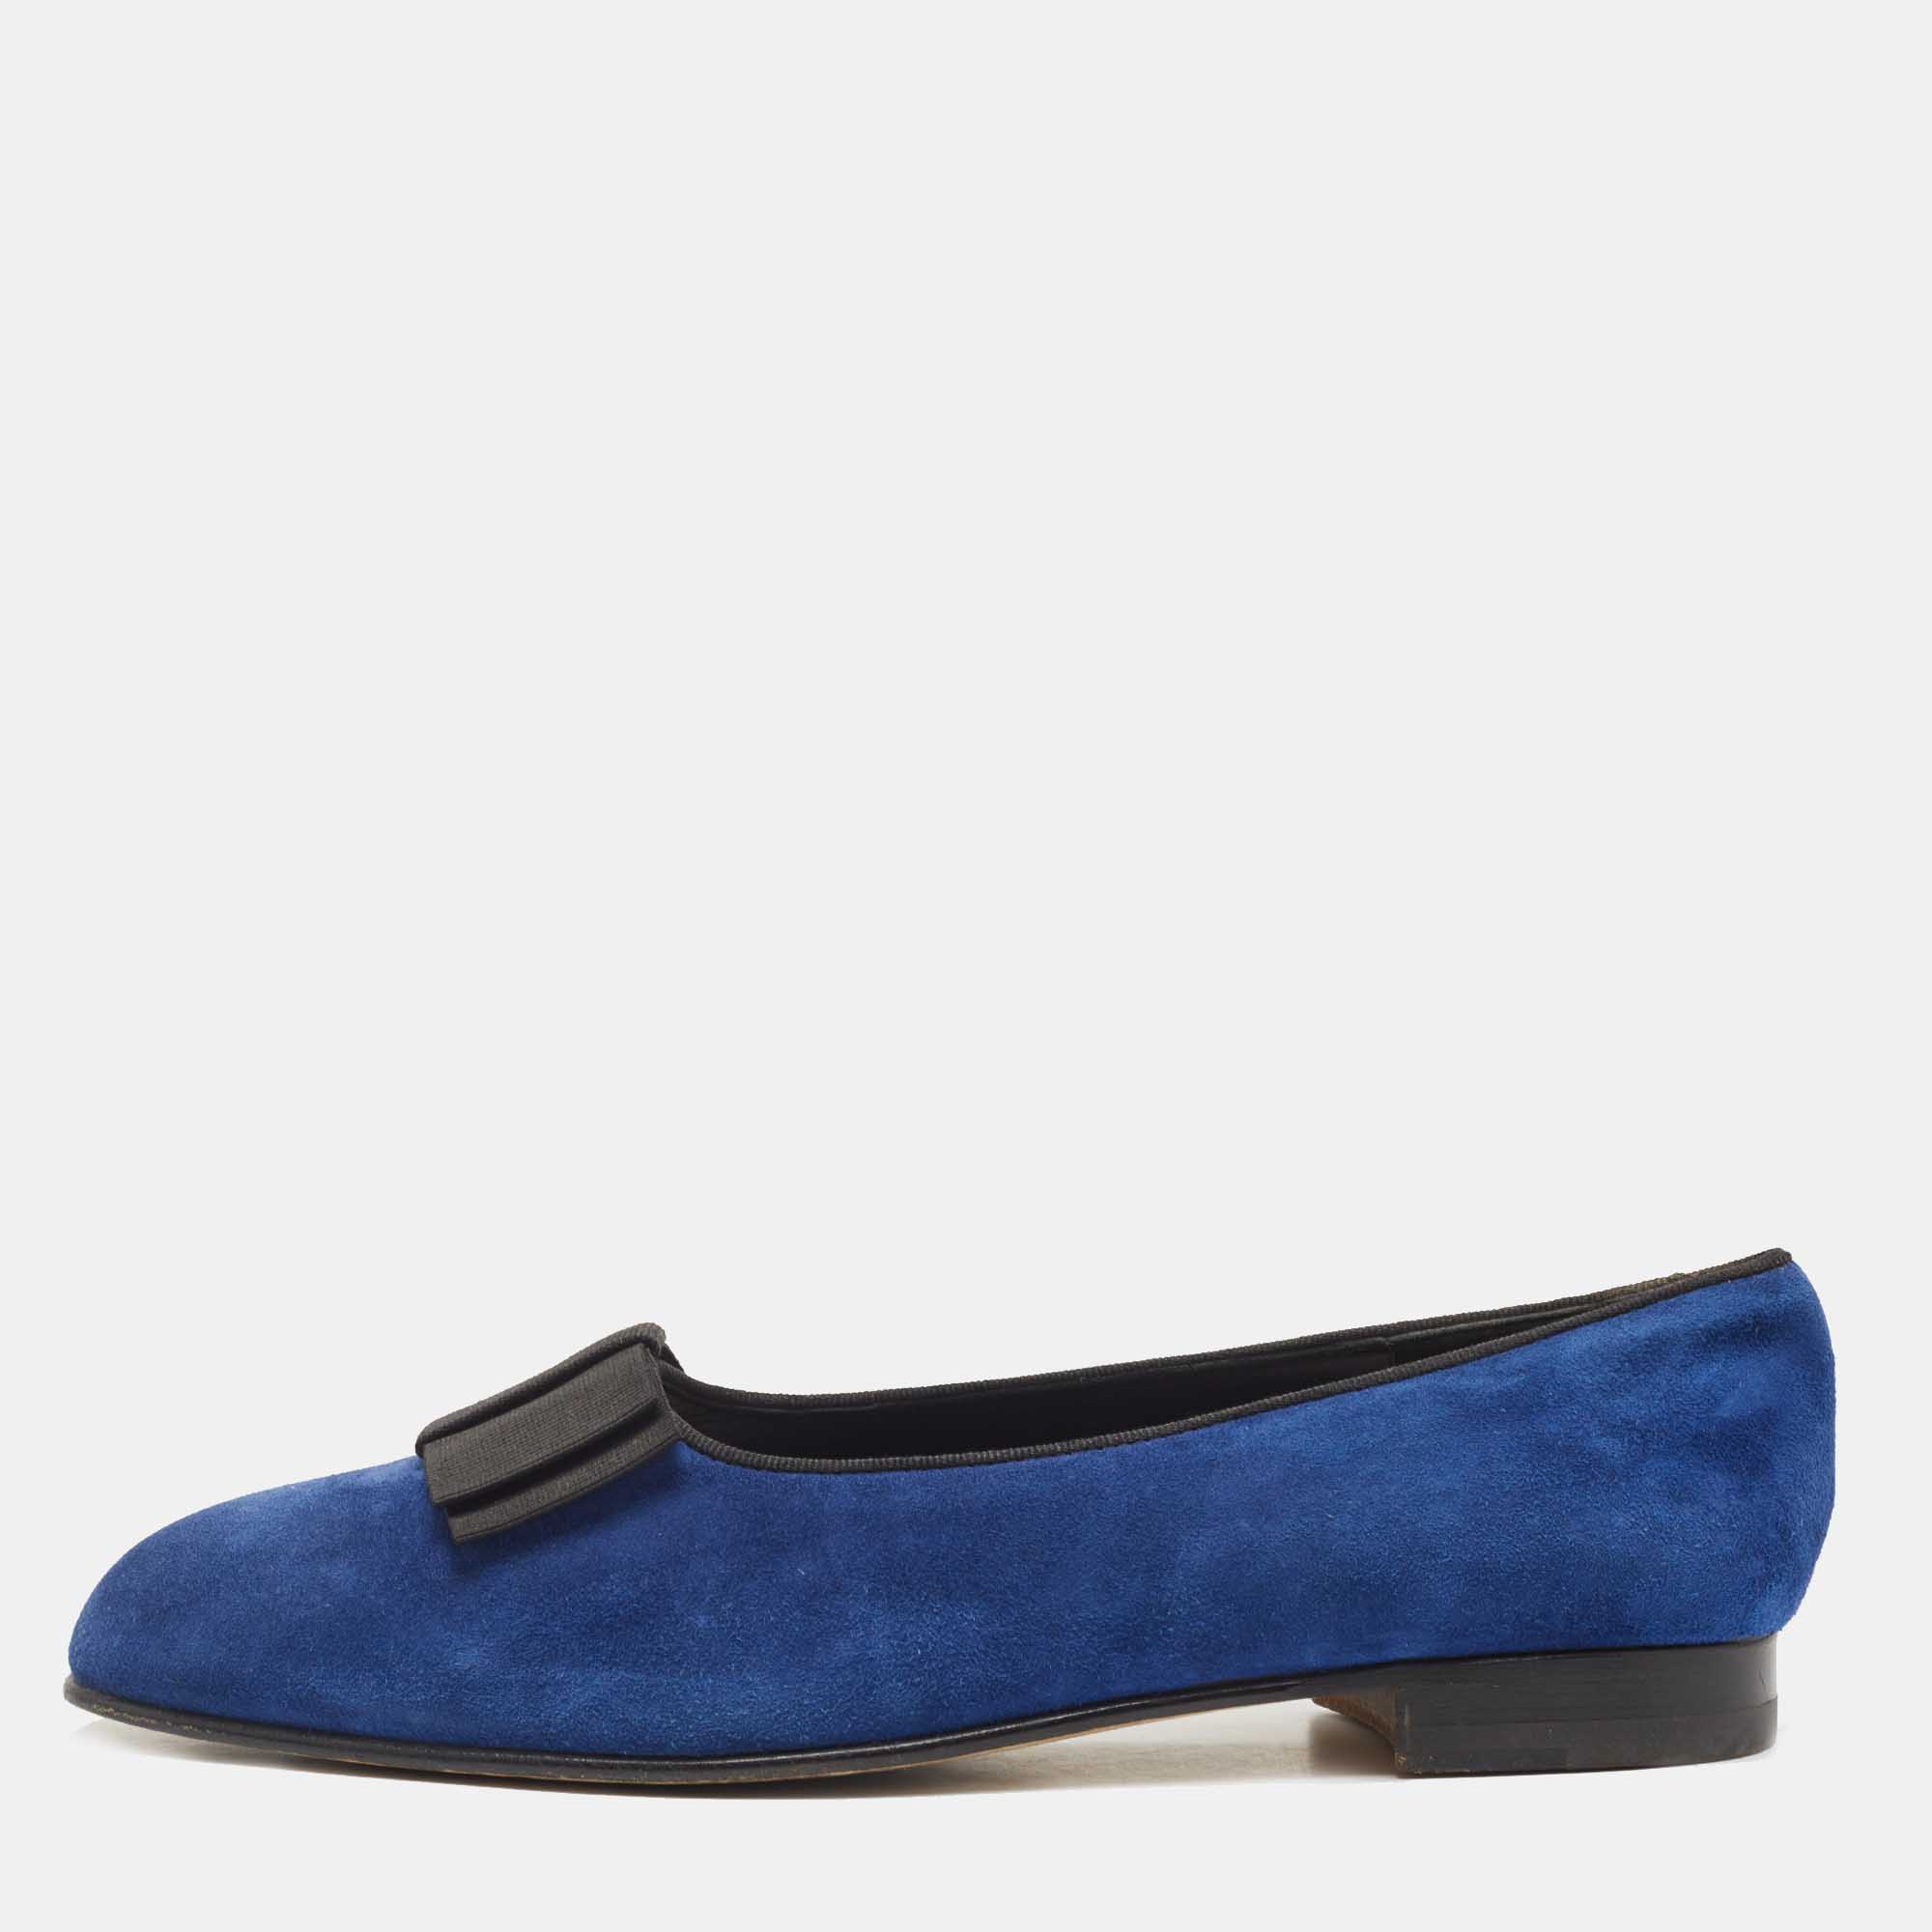 Pre-owned Manolo Blahnik Blue Suede Leather Toro Opera Bow Slip On Loafers Size 41.5